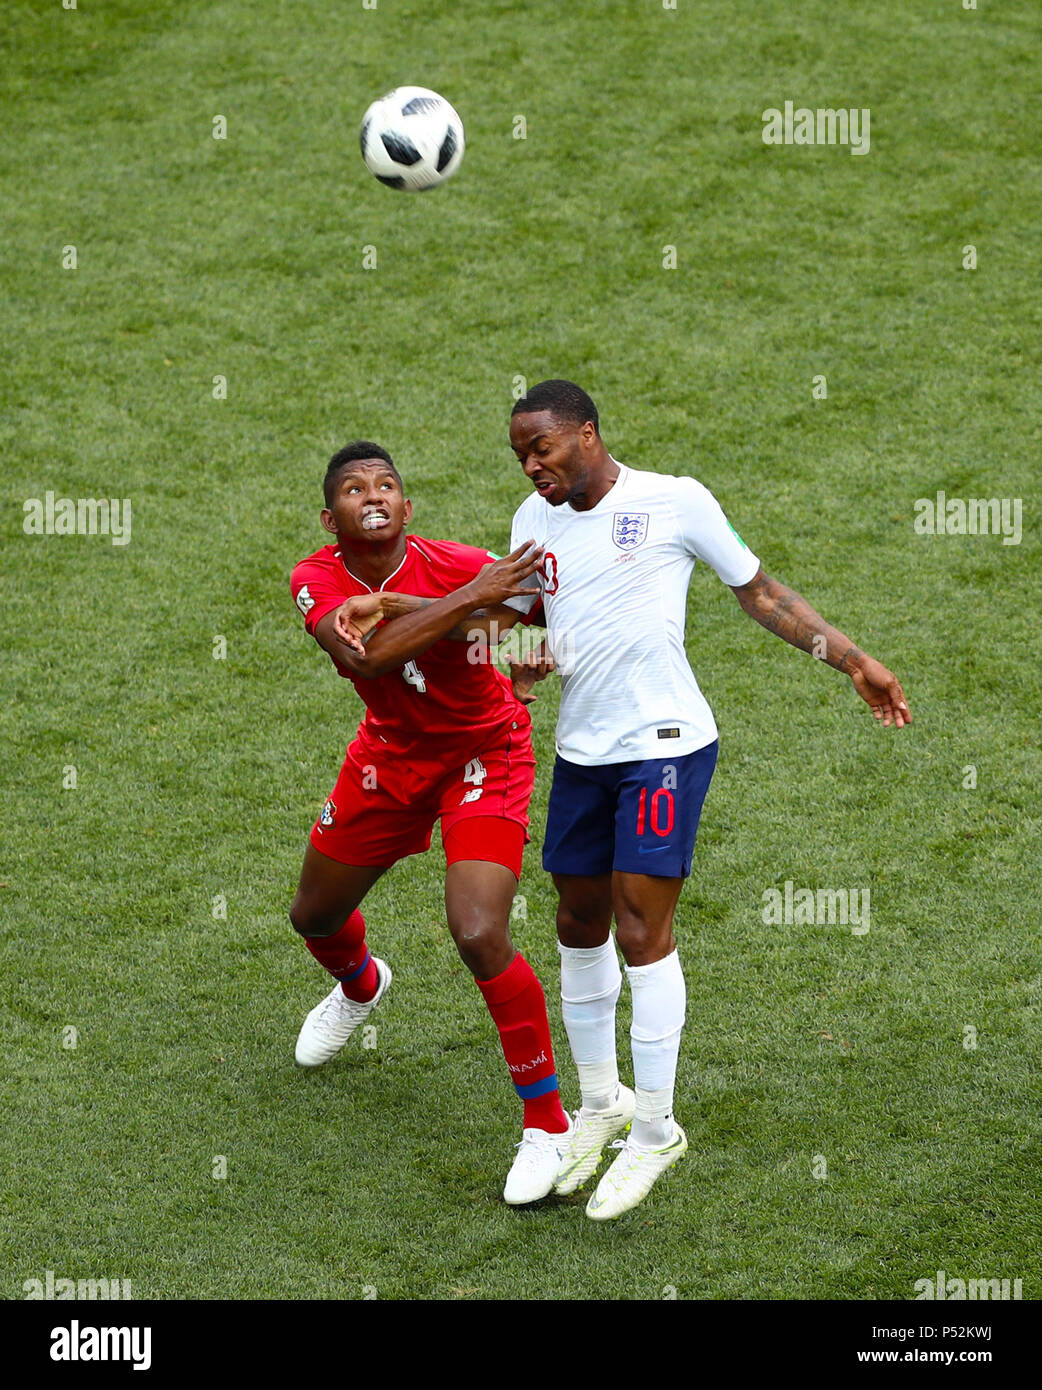 Panama's Fidel Escobar (left) and England's Raheem Sterling battle for the ball during the FIFA World Cup Group G match at the Nizhny Novgorod Stadium. Stock Photo